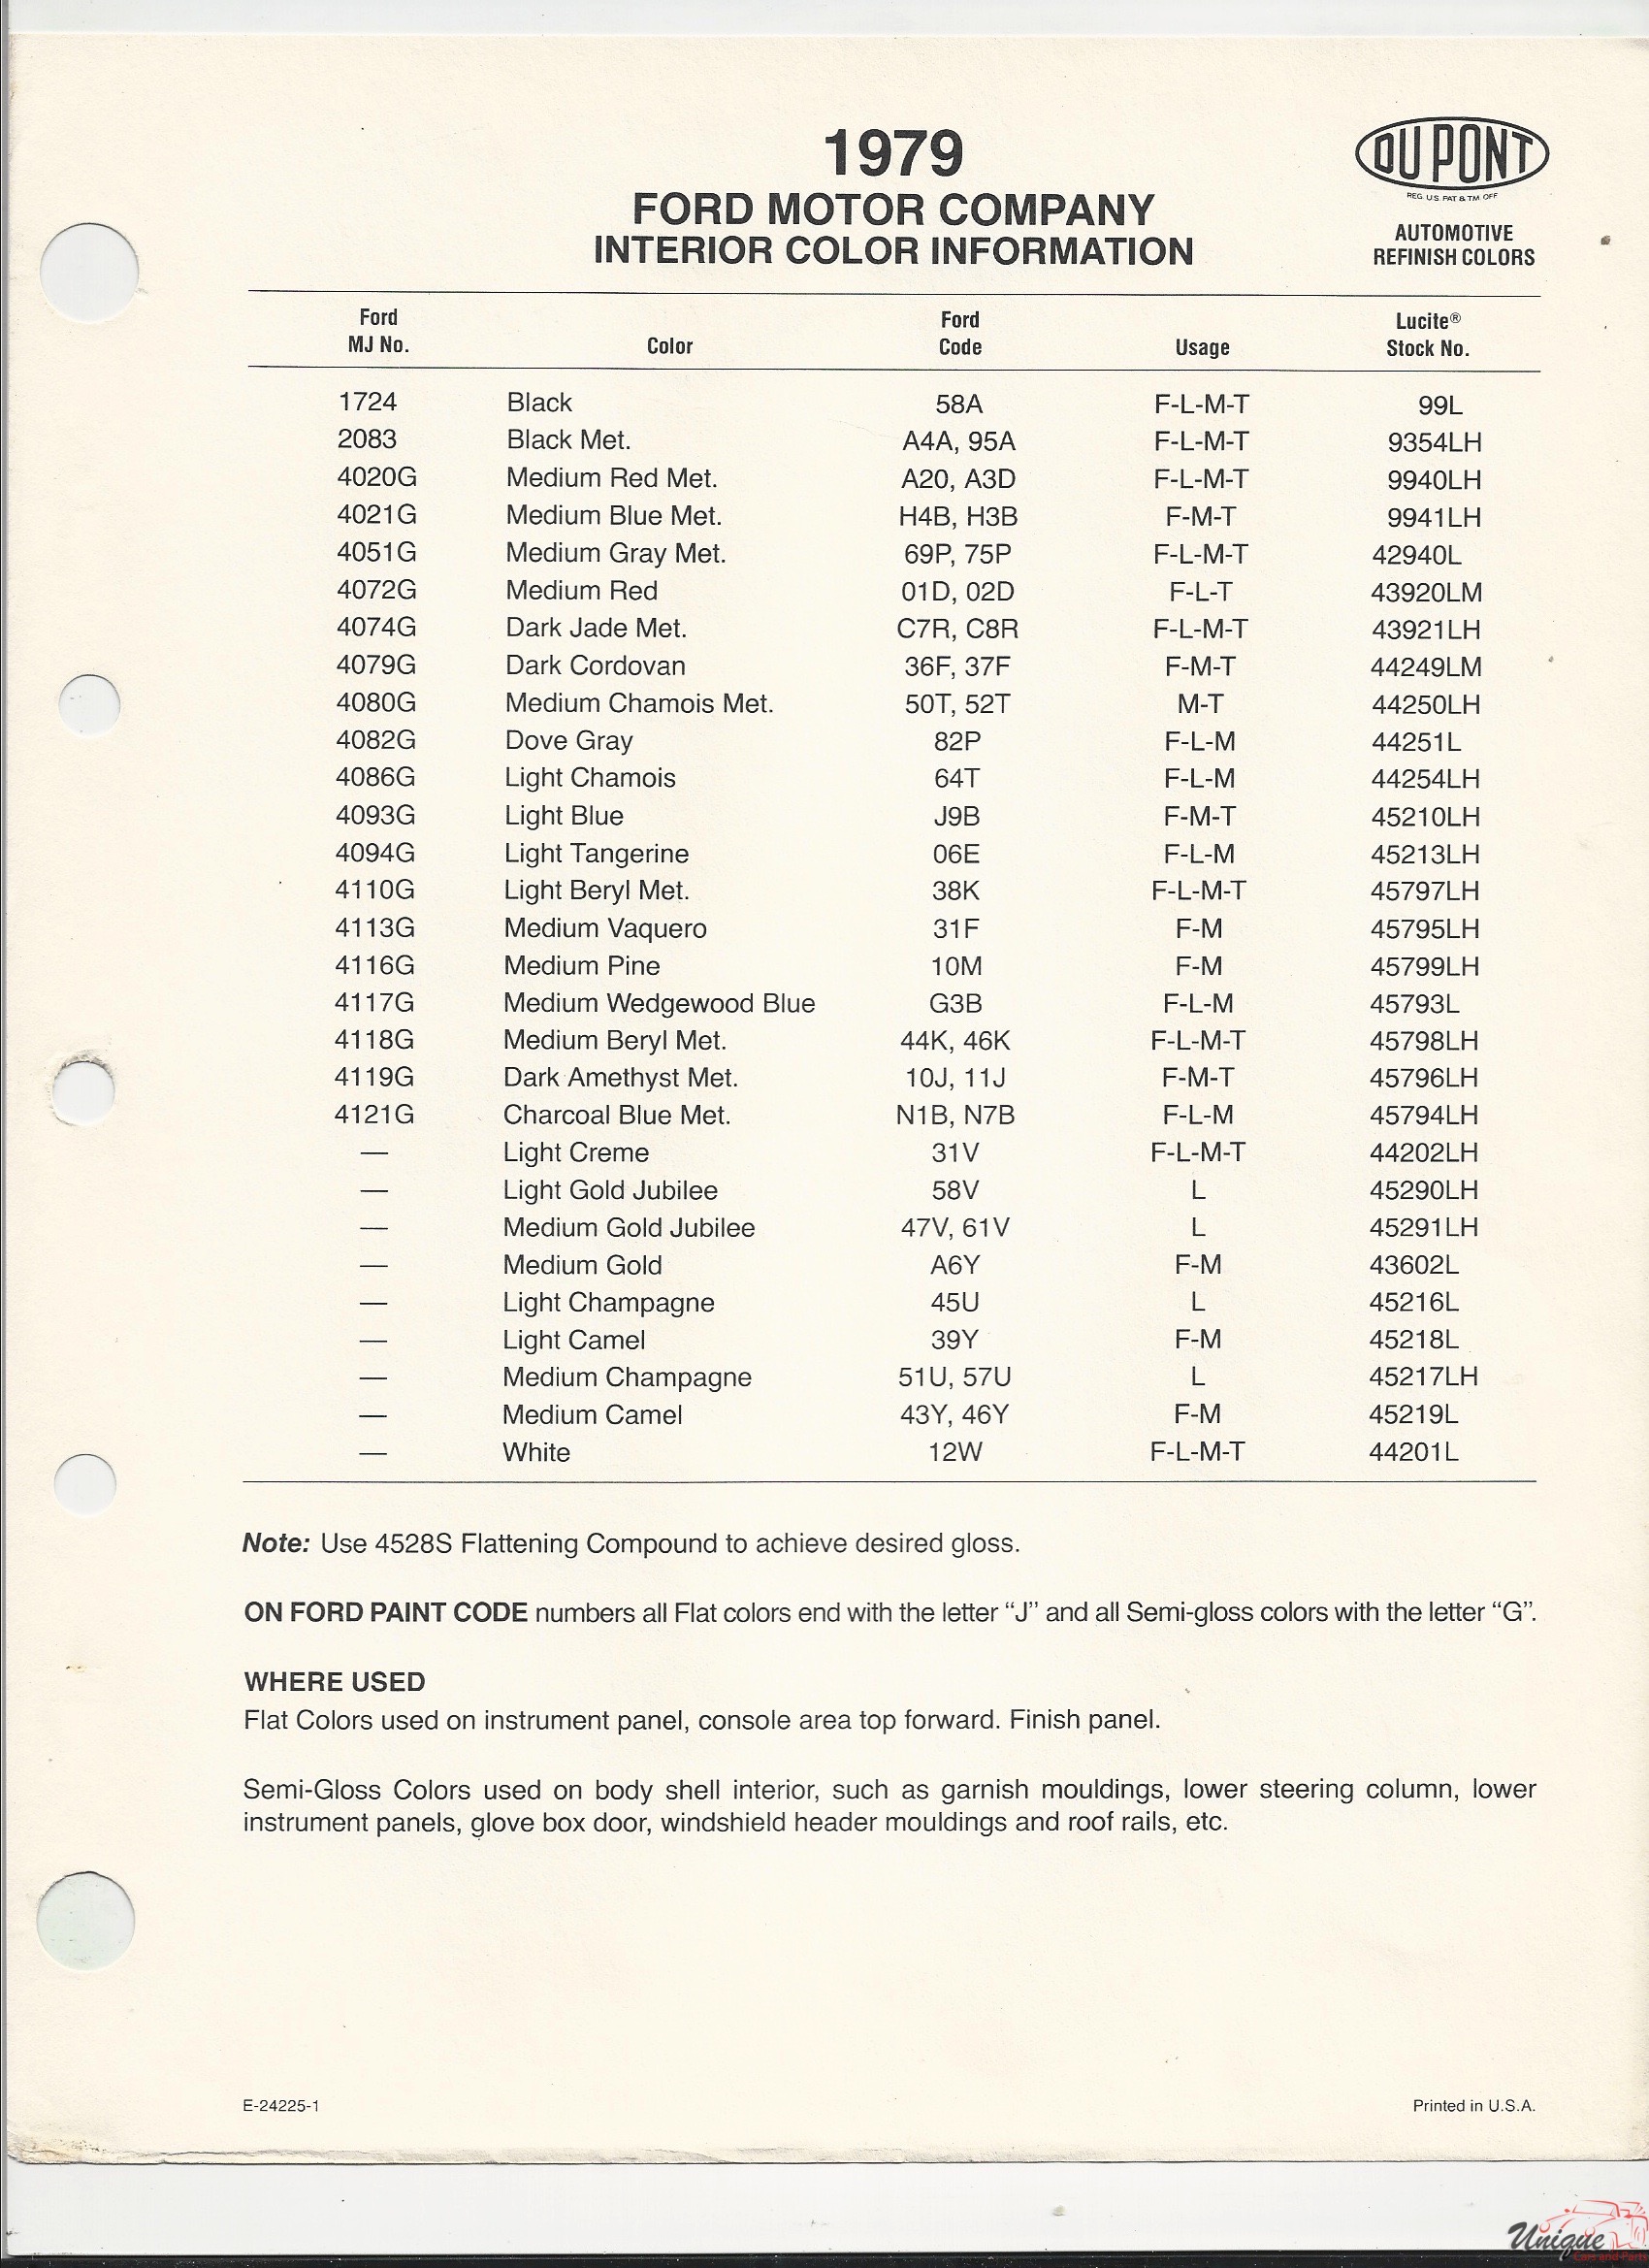 1979 Ford Interior Paint Charts